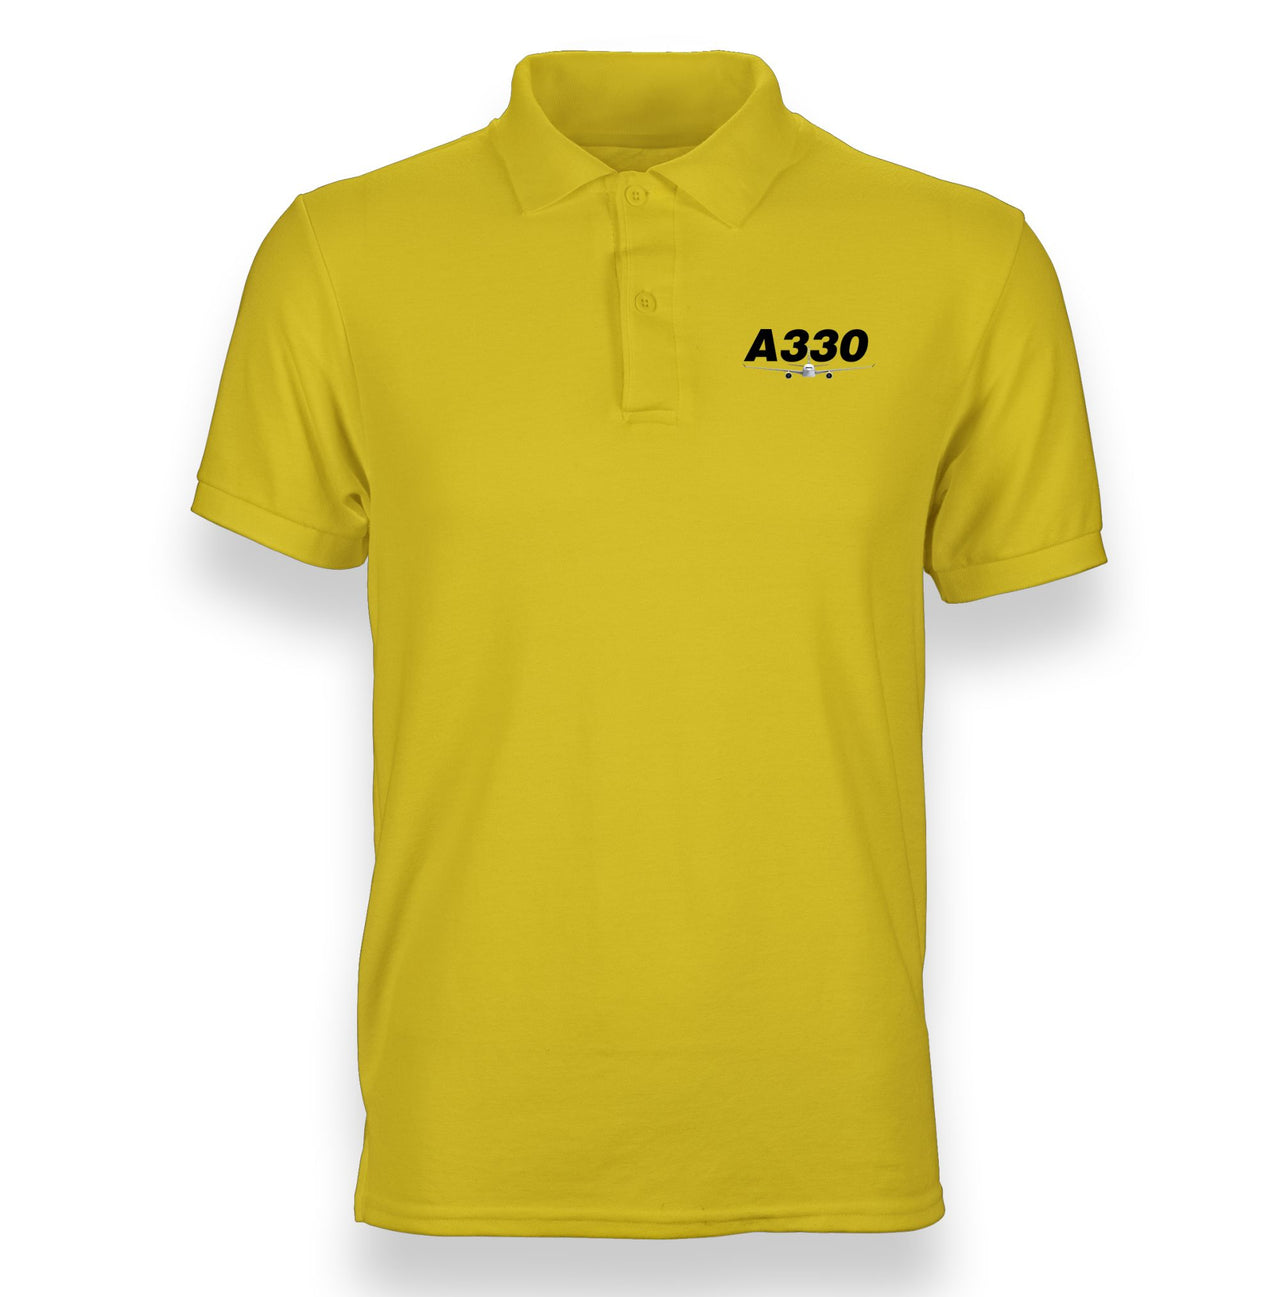 Super Airbus A330 Designed "WOMEN" Polo T-Shirts